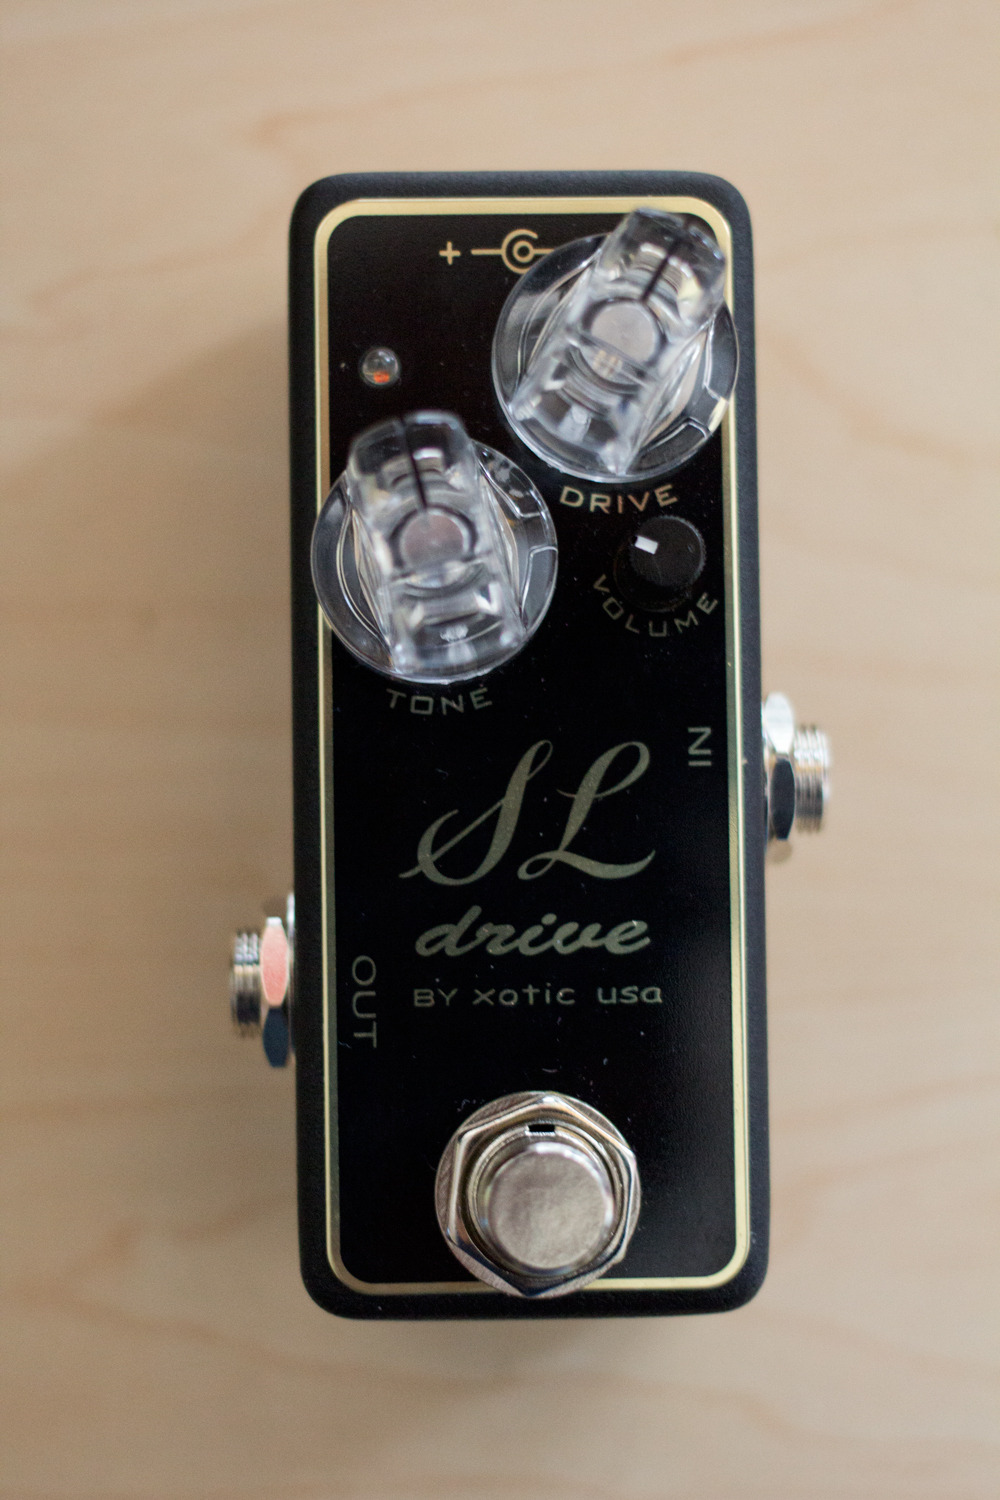 The Tone Control — Xotic Effects SL Drive | Review The Xotic SL